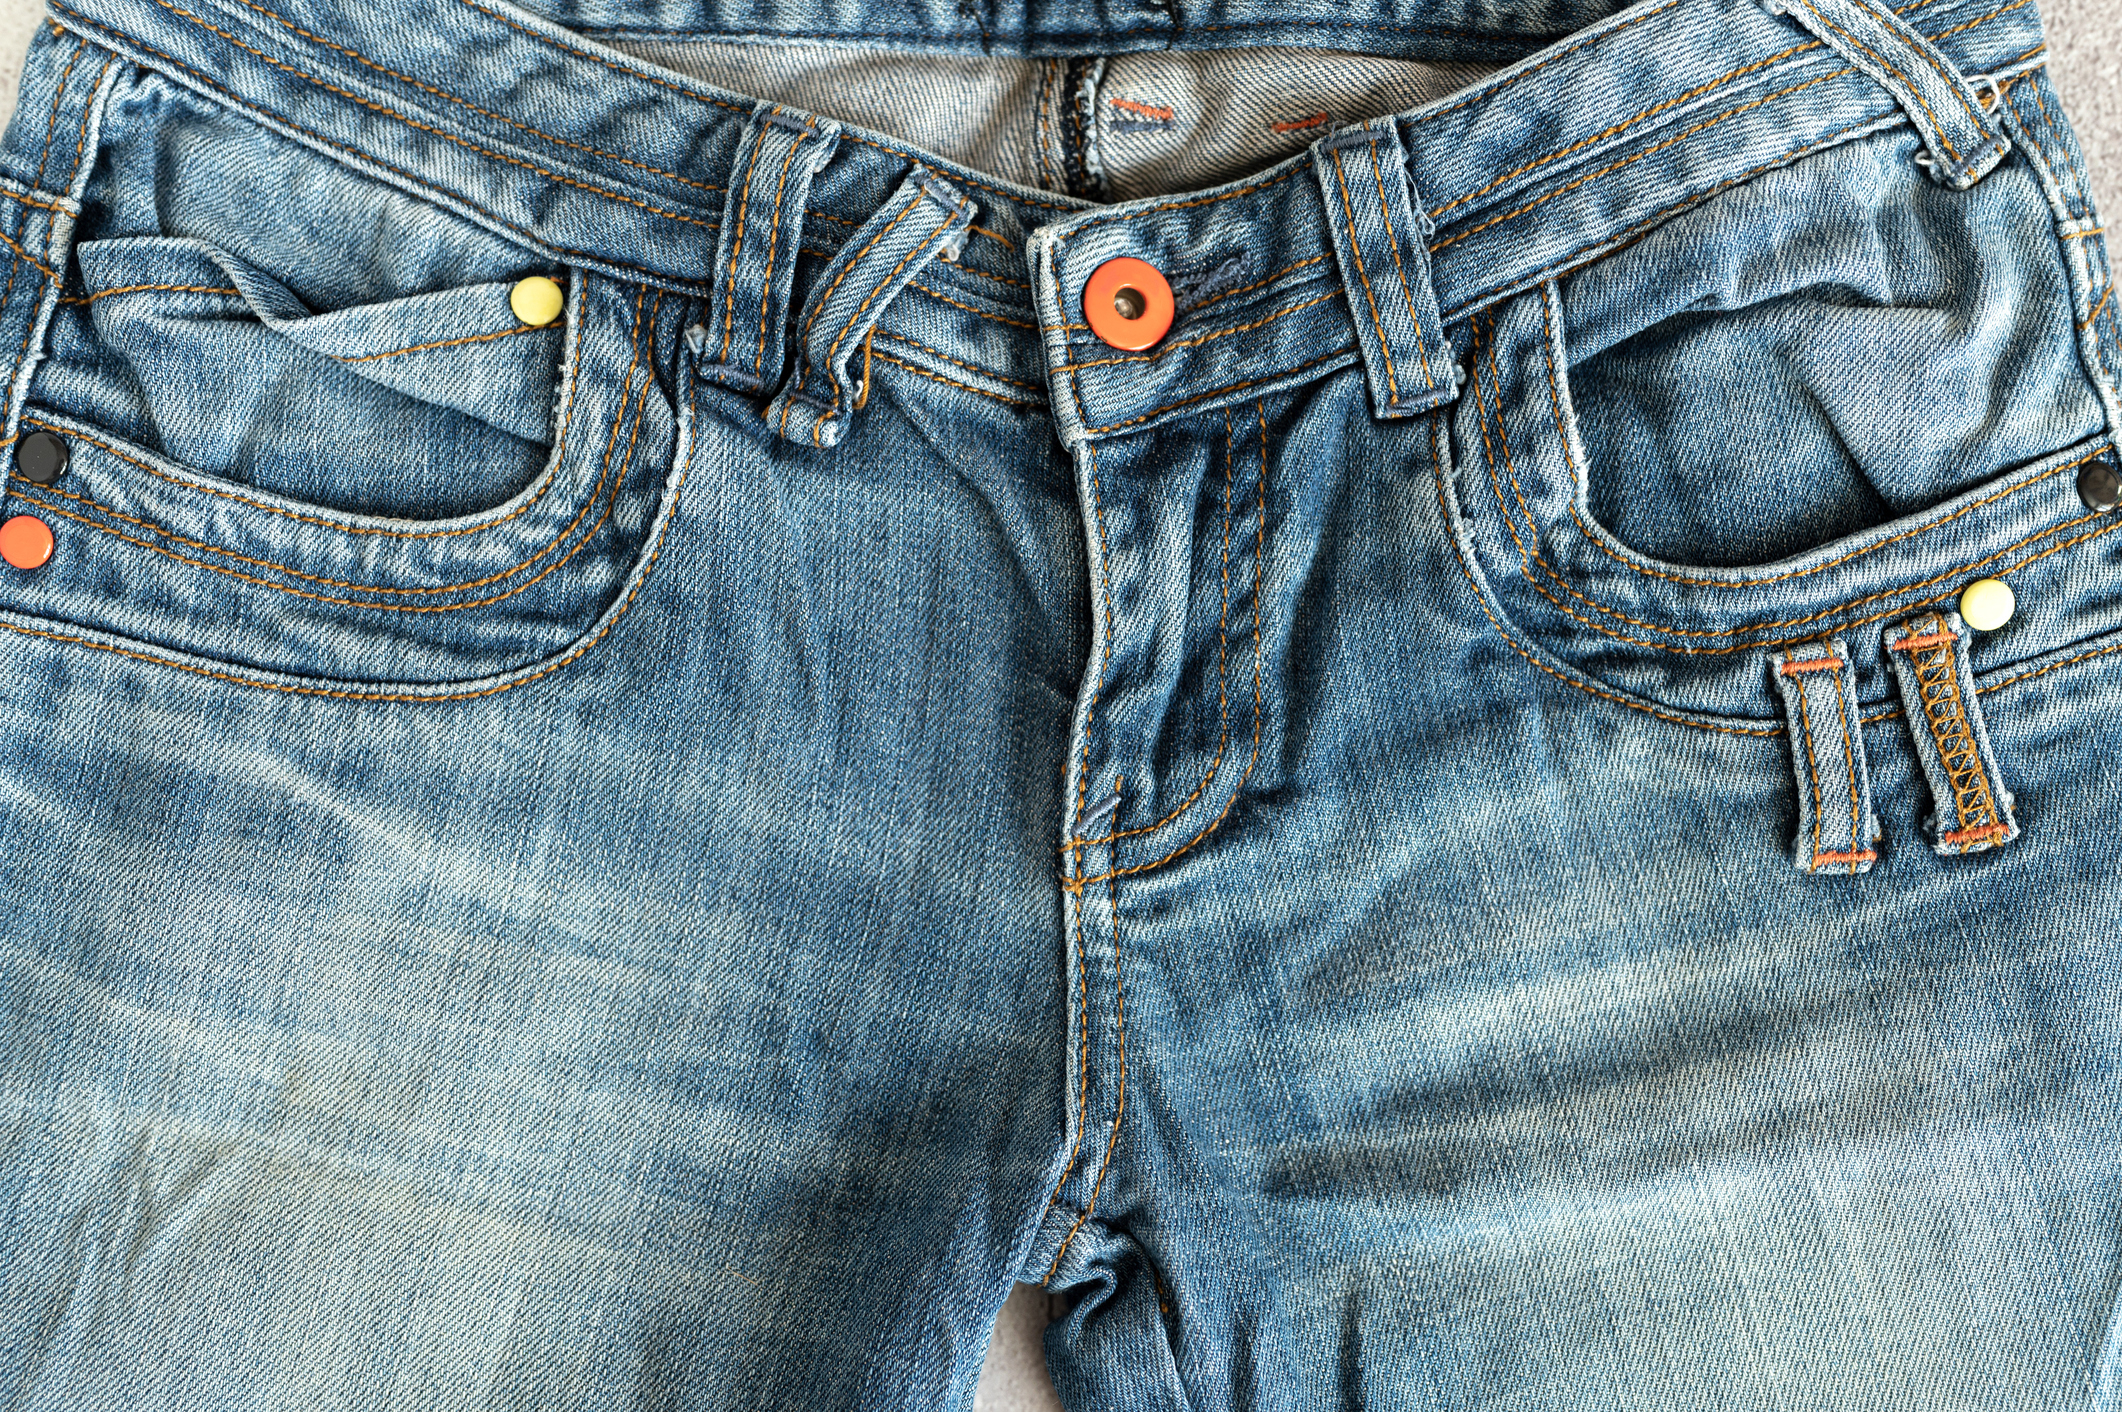 Close-up of a pair of denim jeans with button and pockets visible